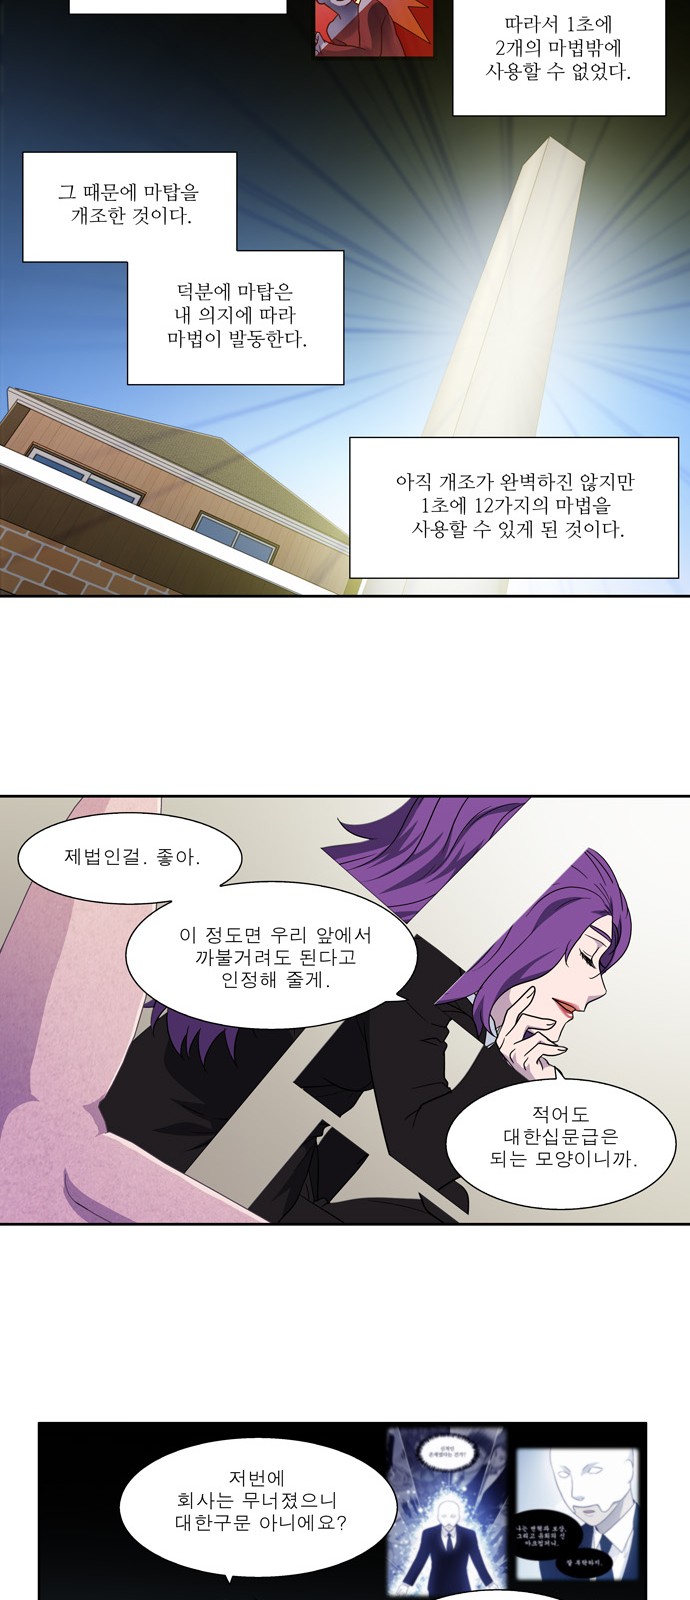 The Gamer - Chapter 301 - Page 21